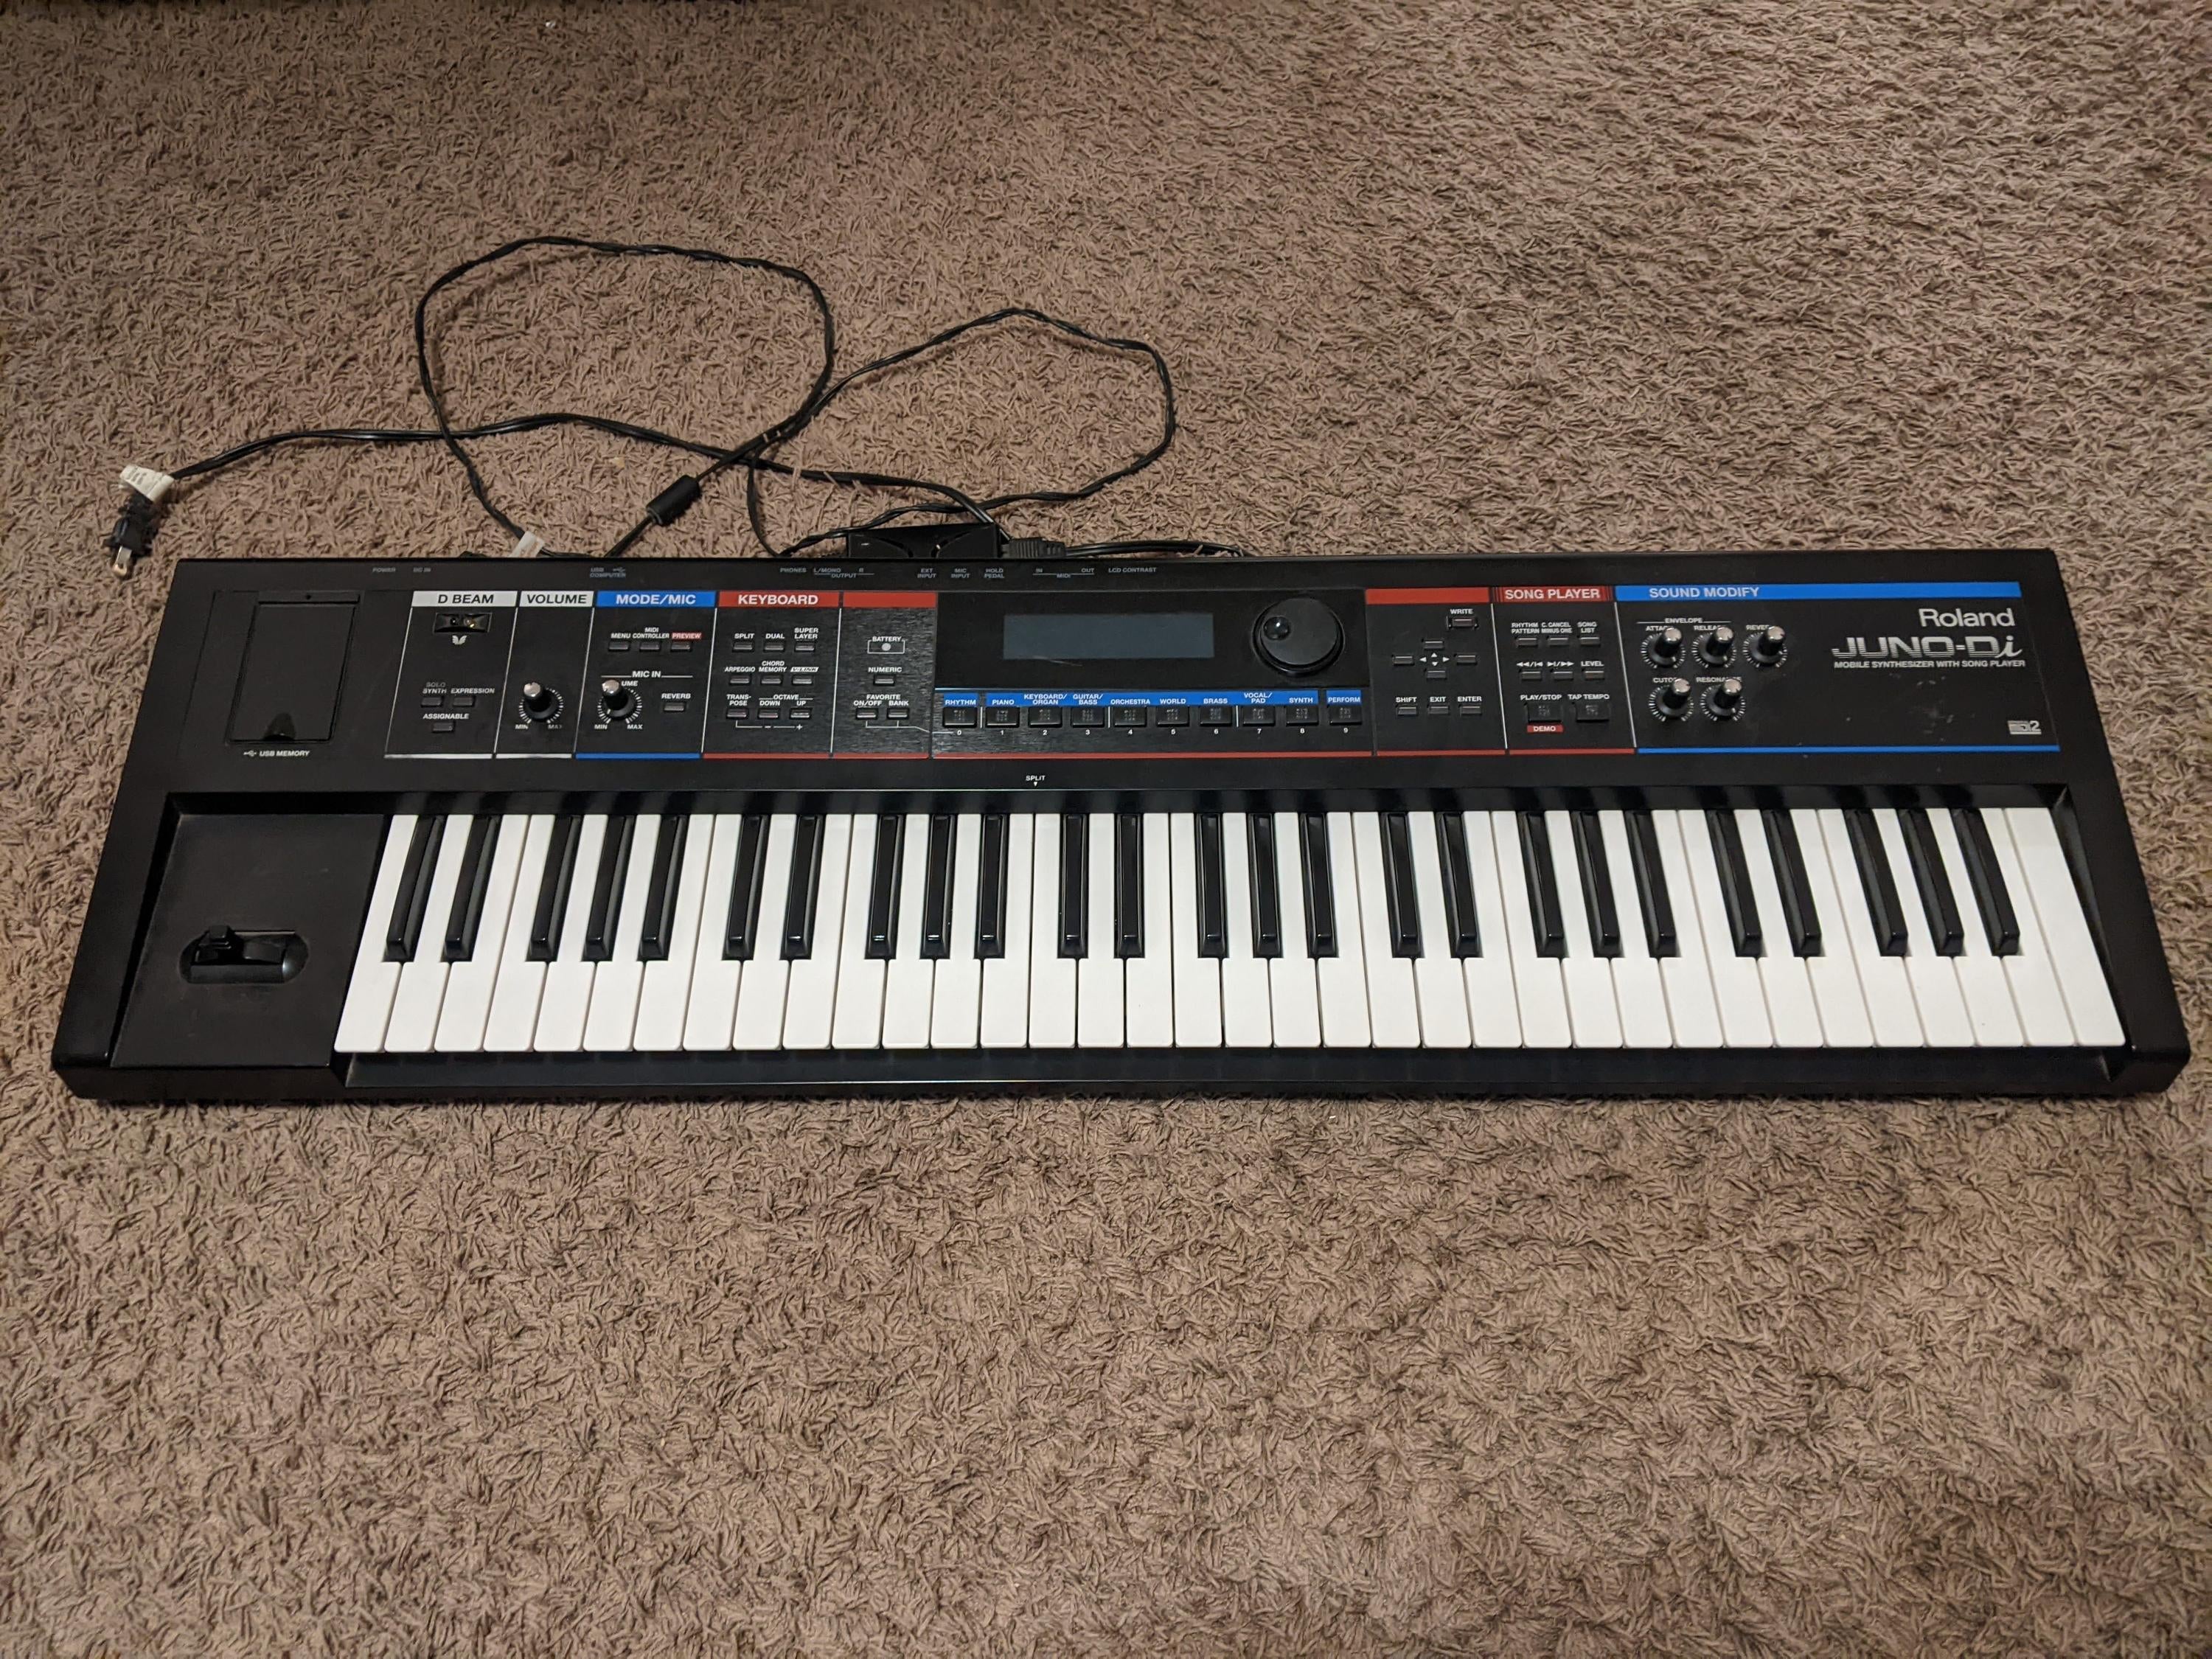 Used Roland Juno-Di - Sweetwater's Gear Exchange